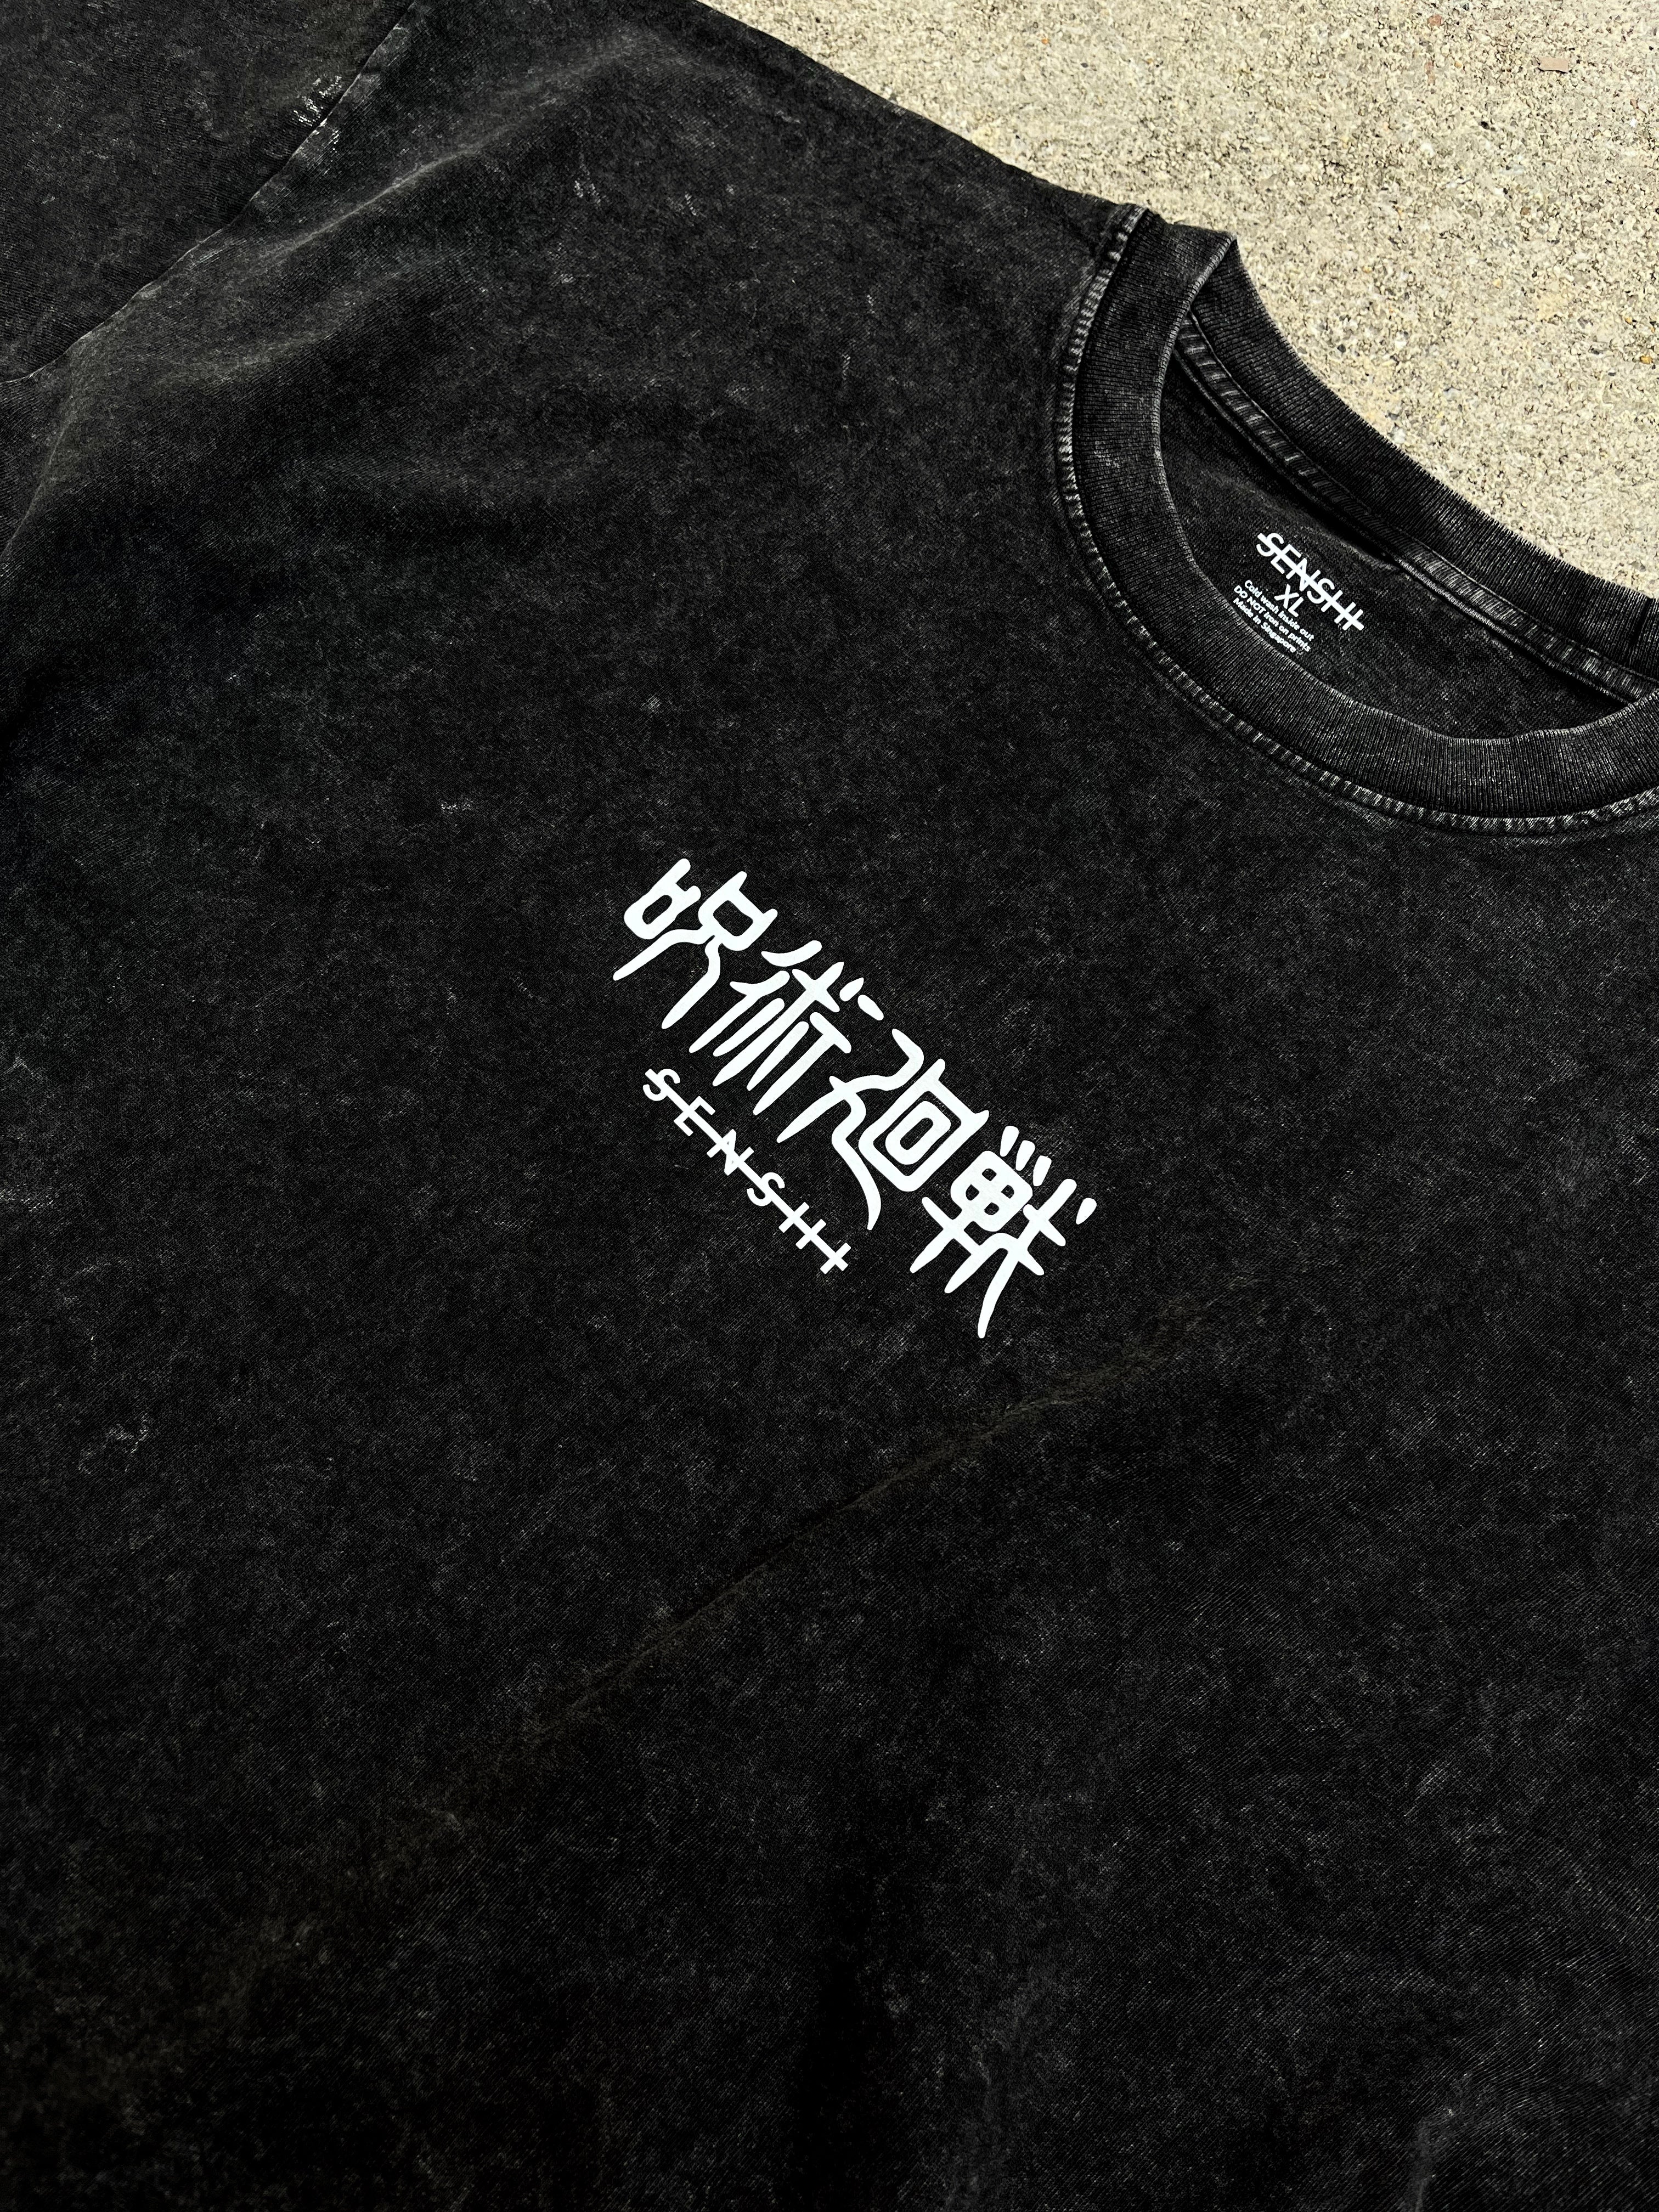 THE HONORED ONE VINTAGE TEE